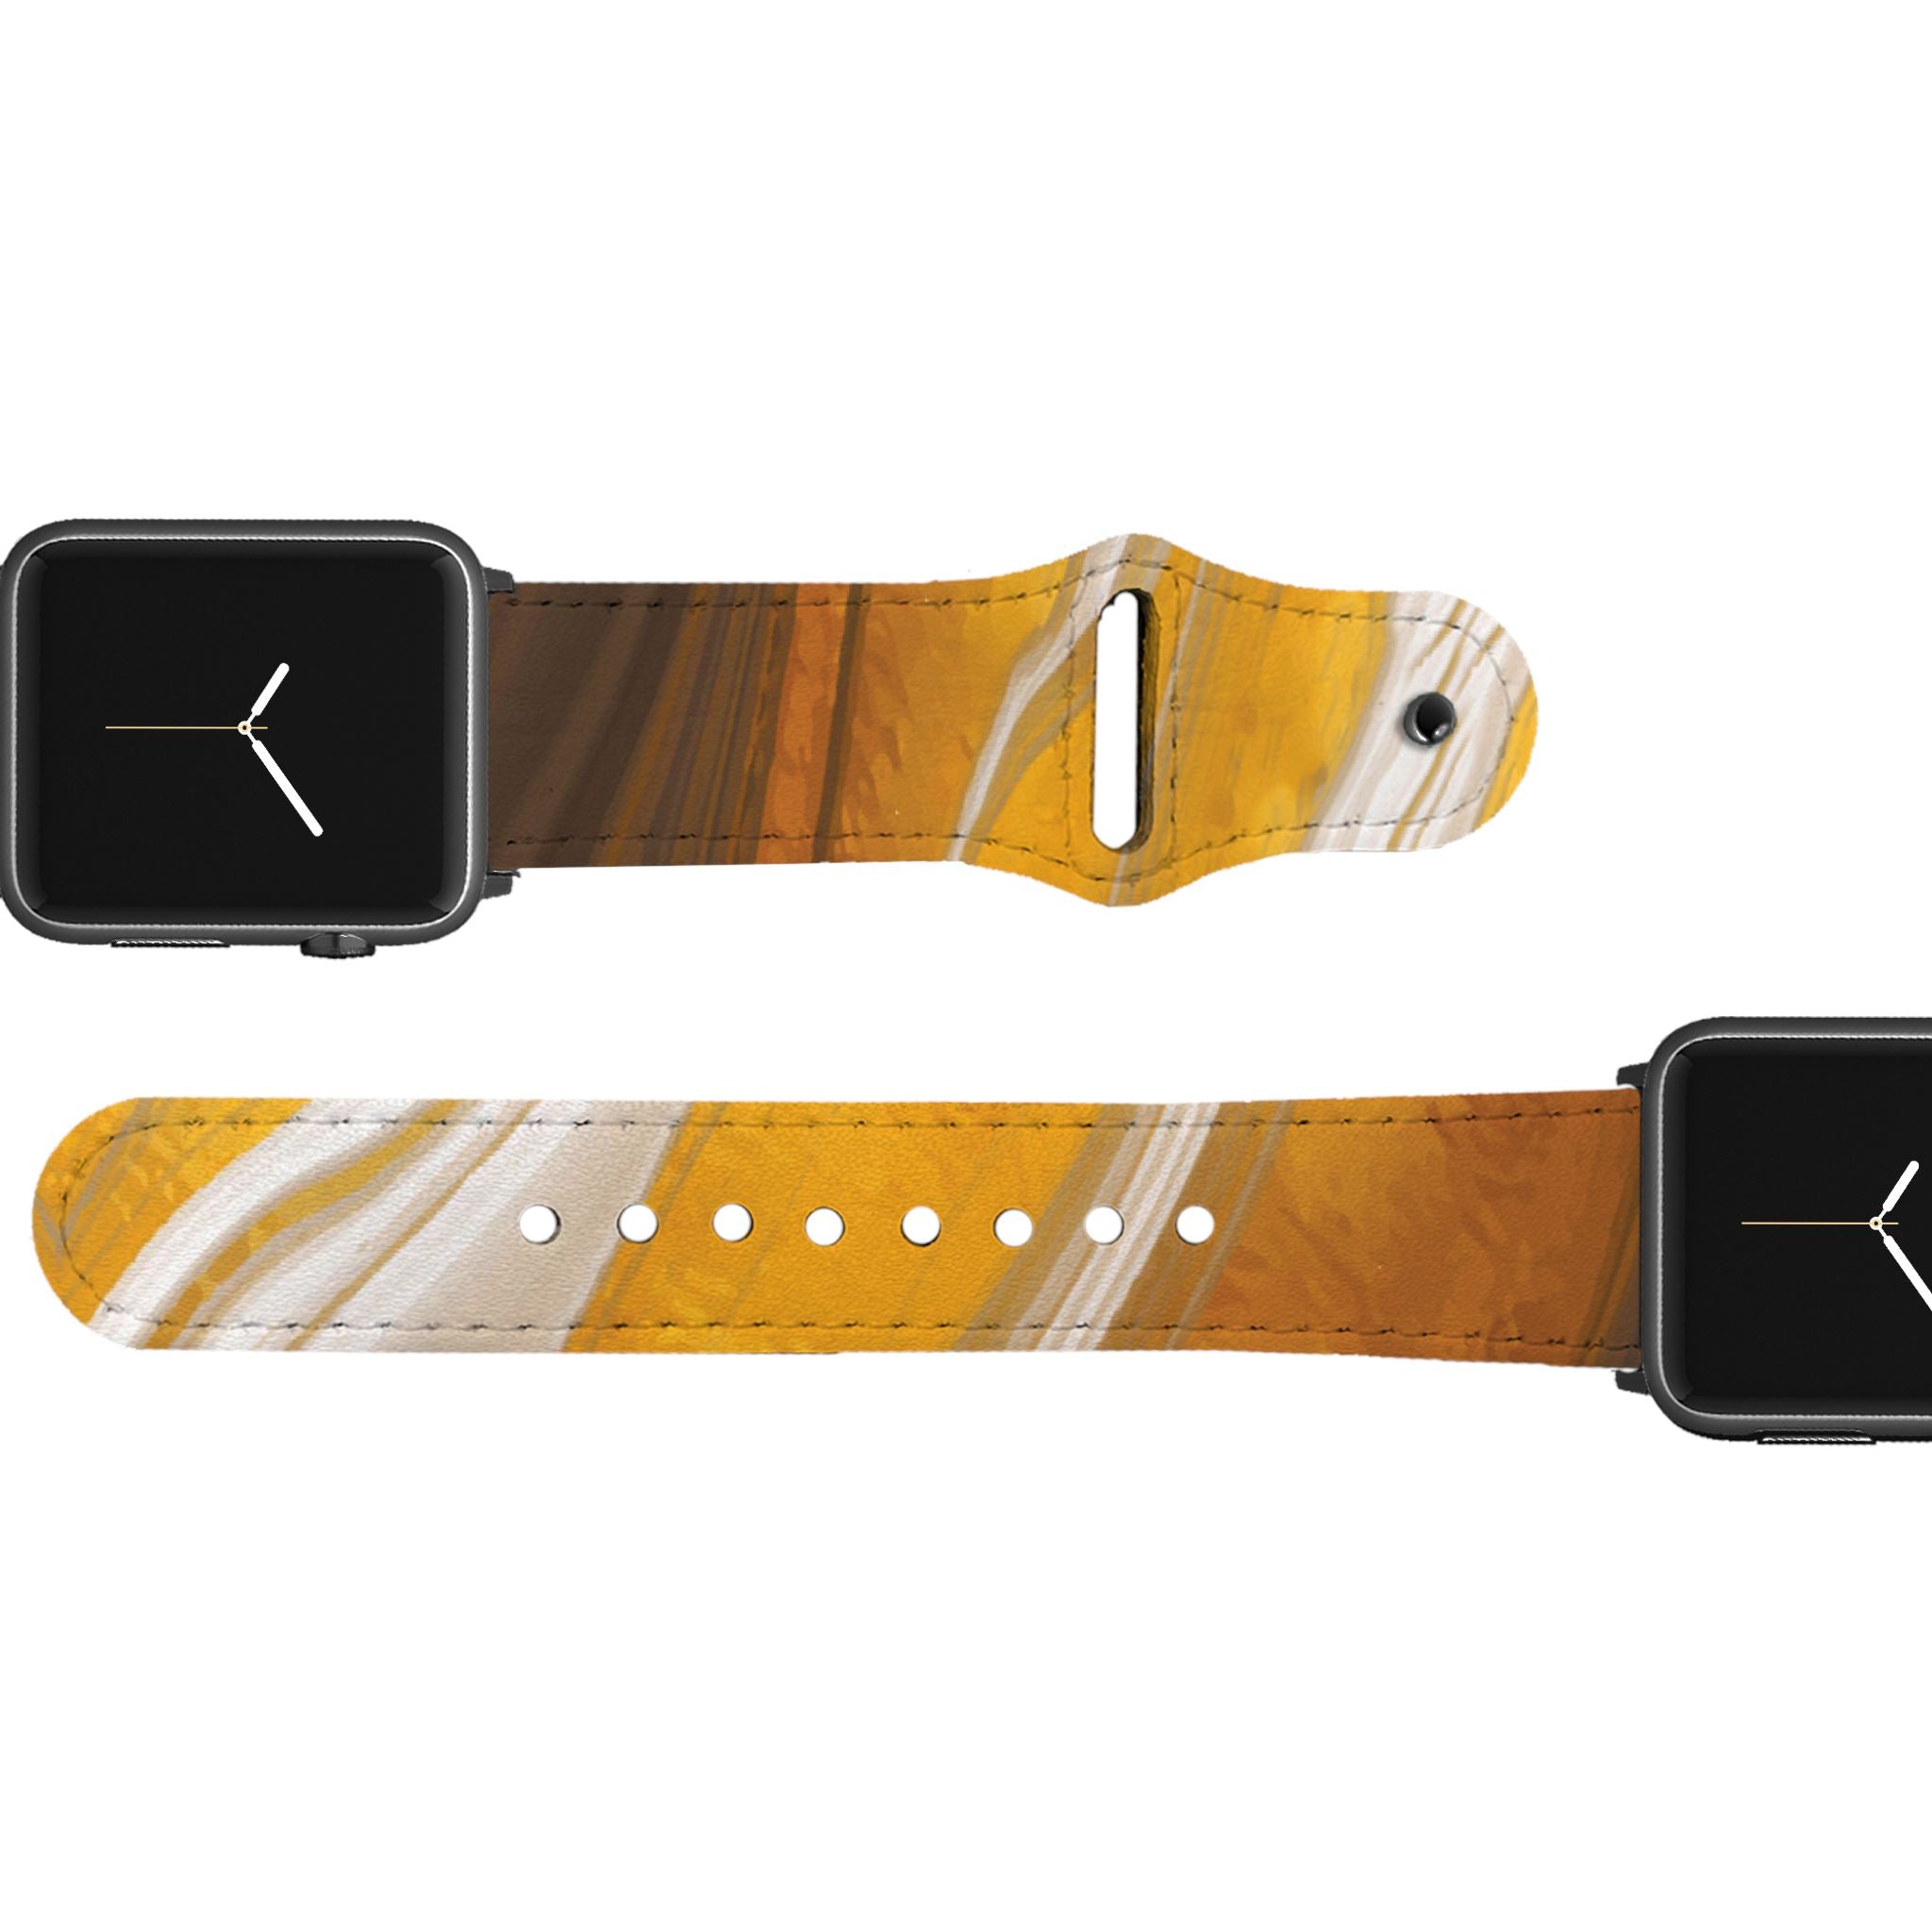 Resin Leather Apple Watch Band Apple Watch Band - Leather C4 BELTS